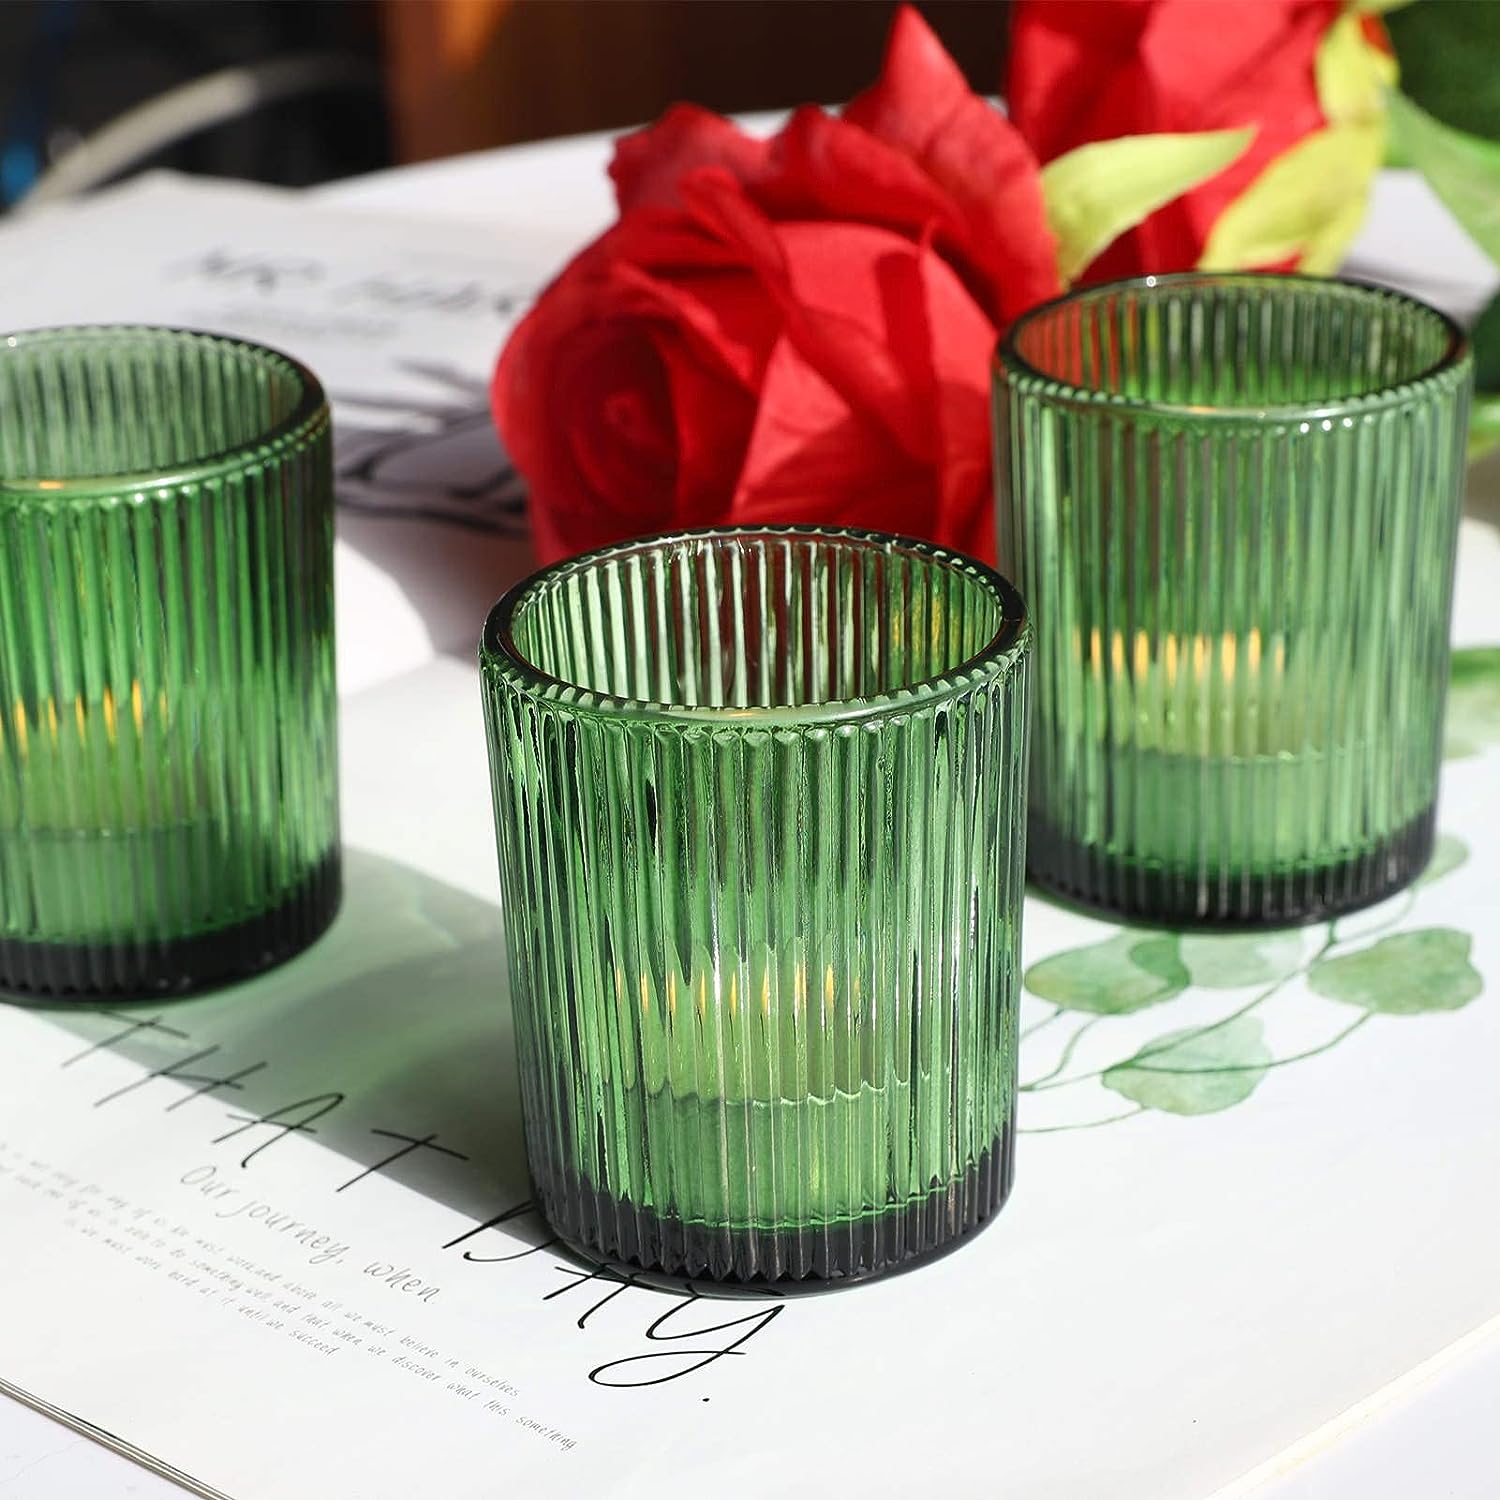 Vohocandle 12pcs Candle Holder Ribbed Glass, Green Votive Candle Holders for Wedding Party Table Centerpieces(2.1'' x 2.6'', Green) - vohocandle